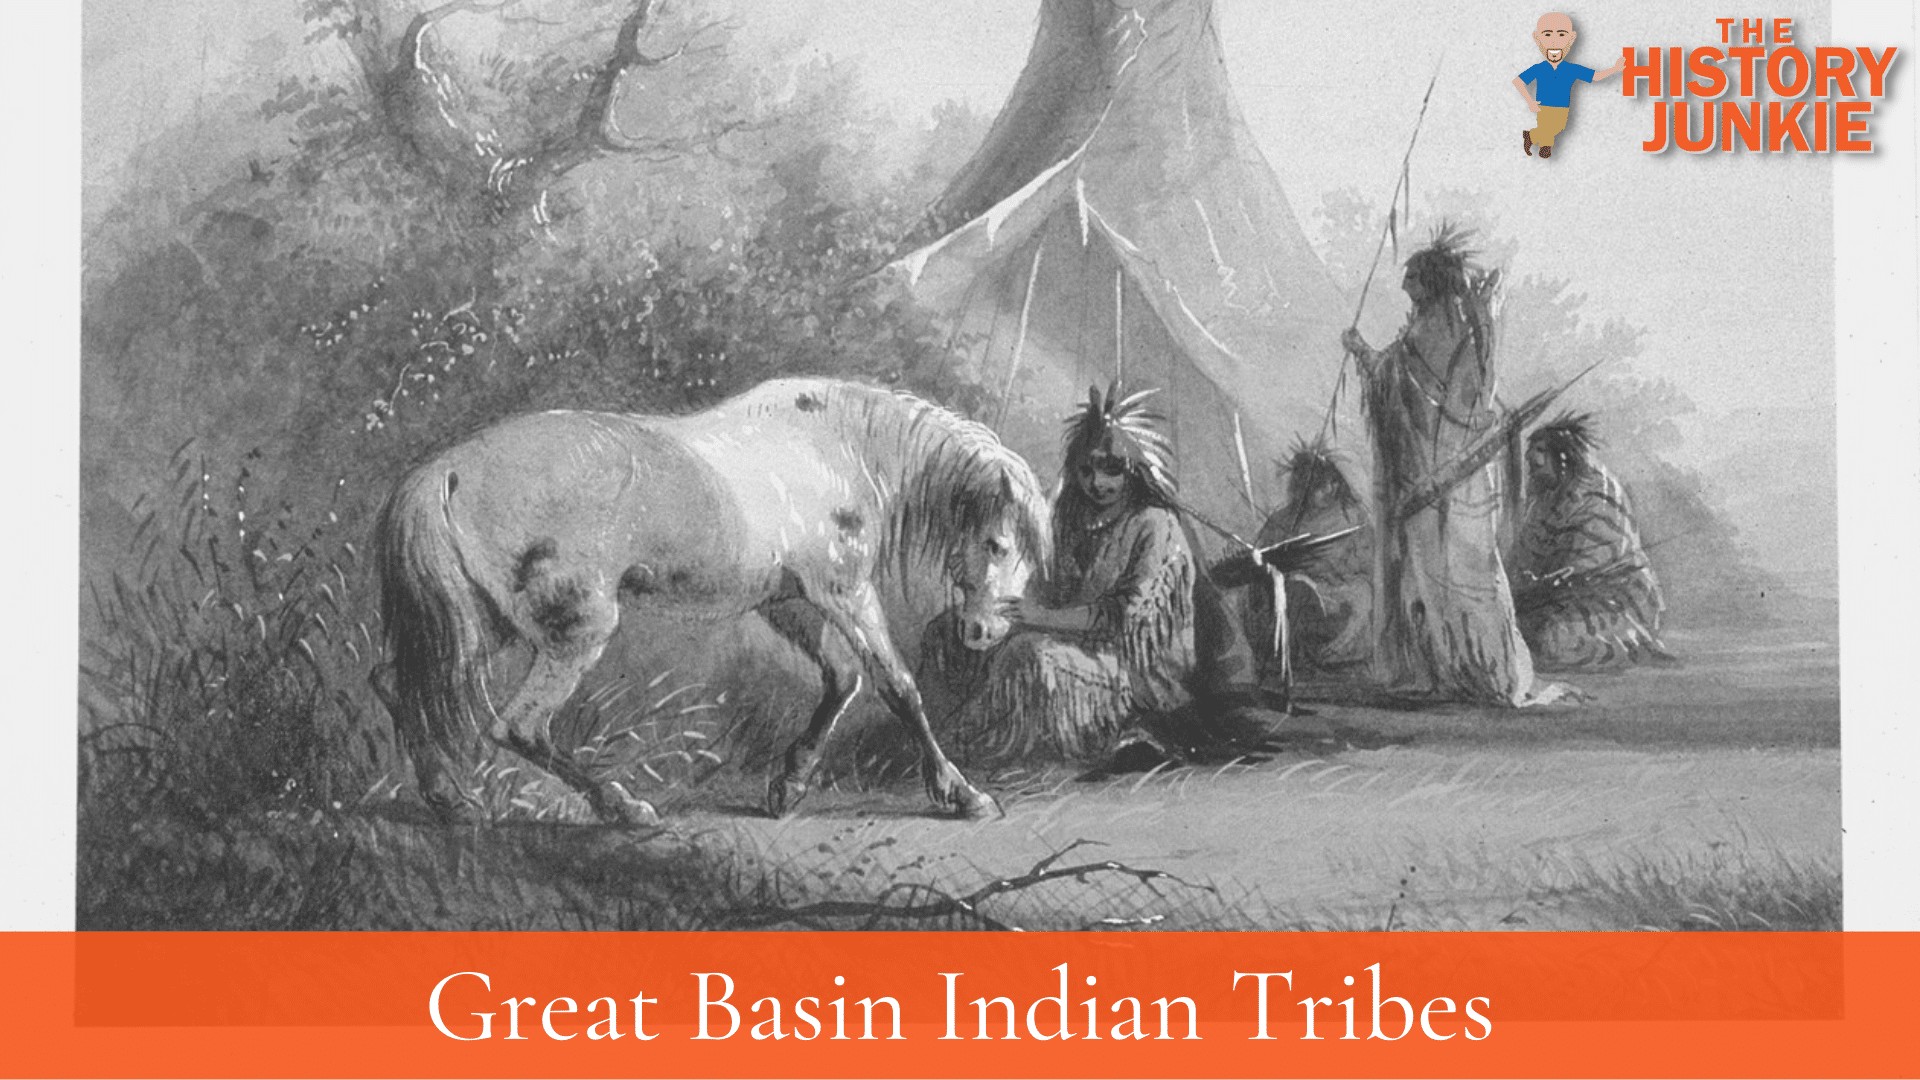 Great Basin Indian Tribes